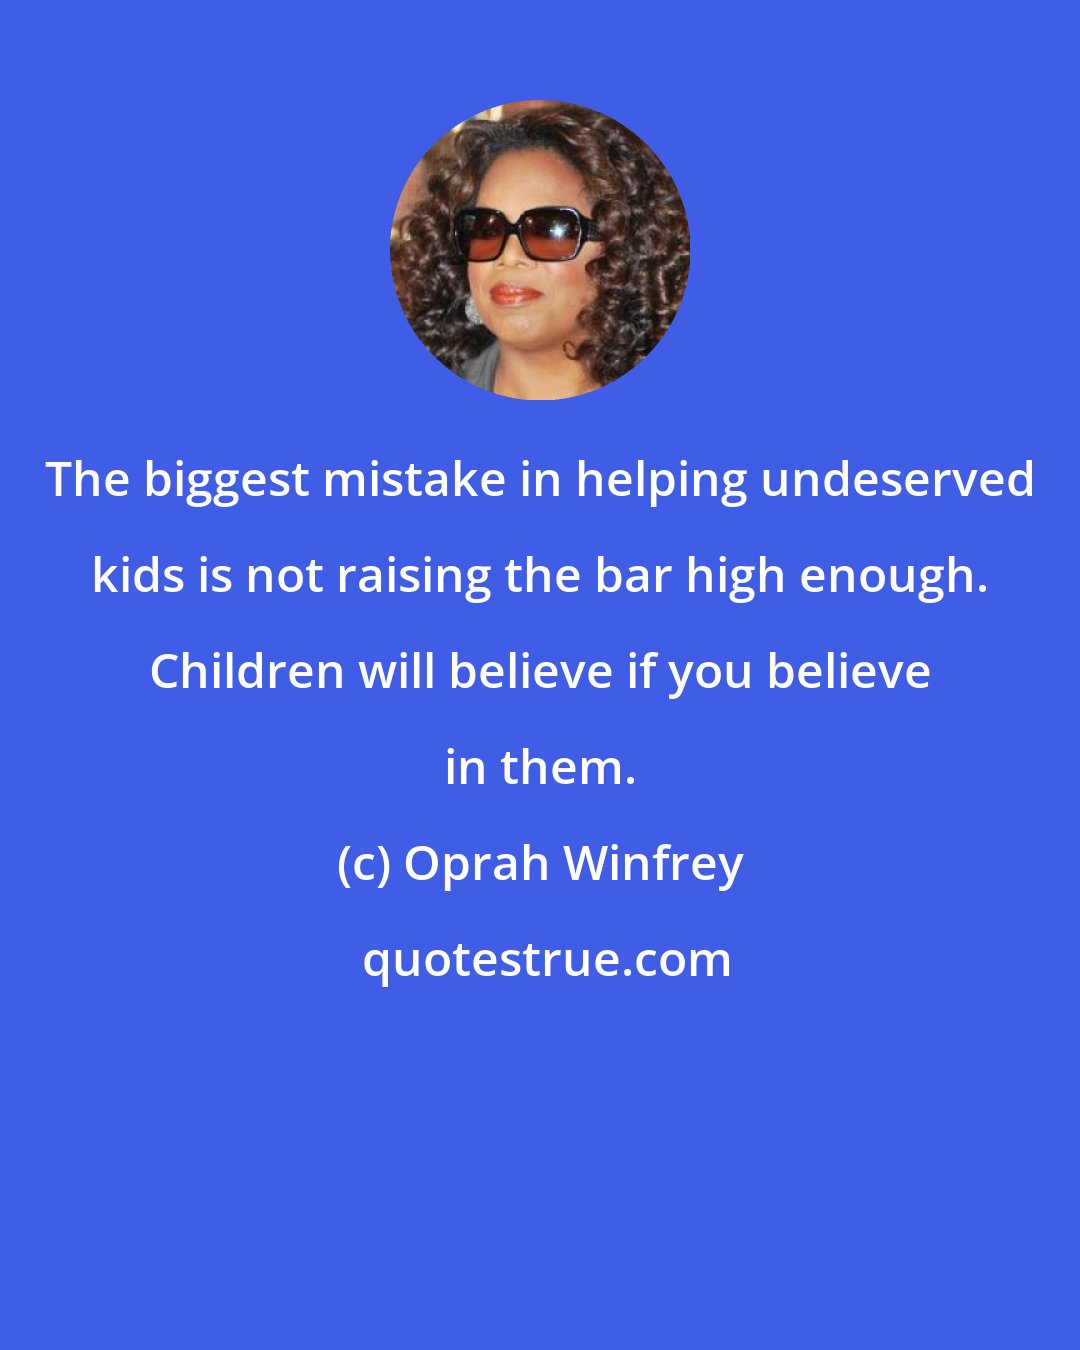 Oprah Winfrey: The biggest mistake in helping undeserved kids is not raising the bar high enough. Children will believe if you believe in them.